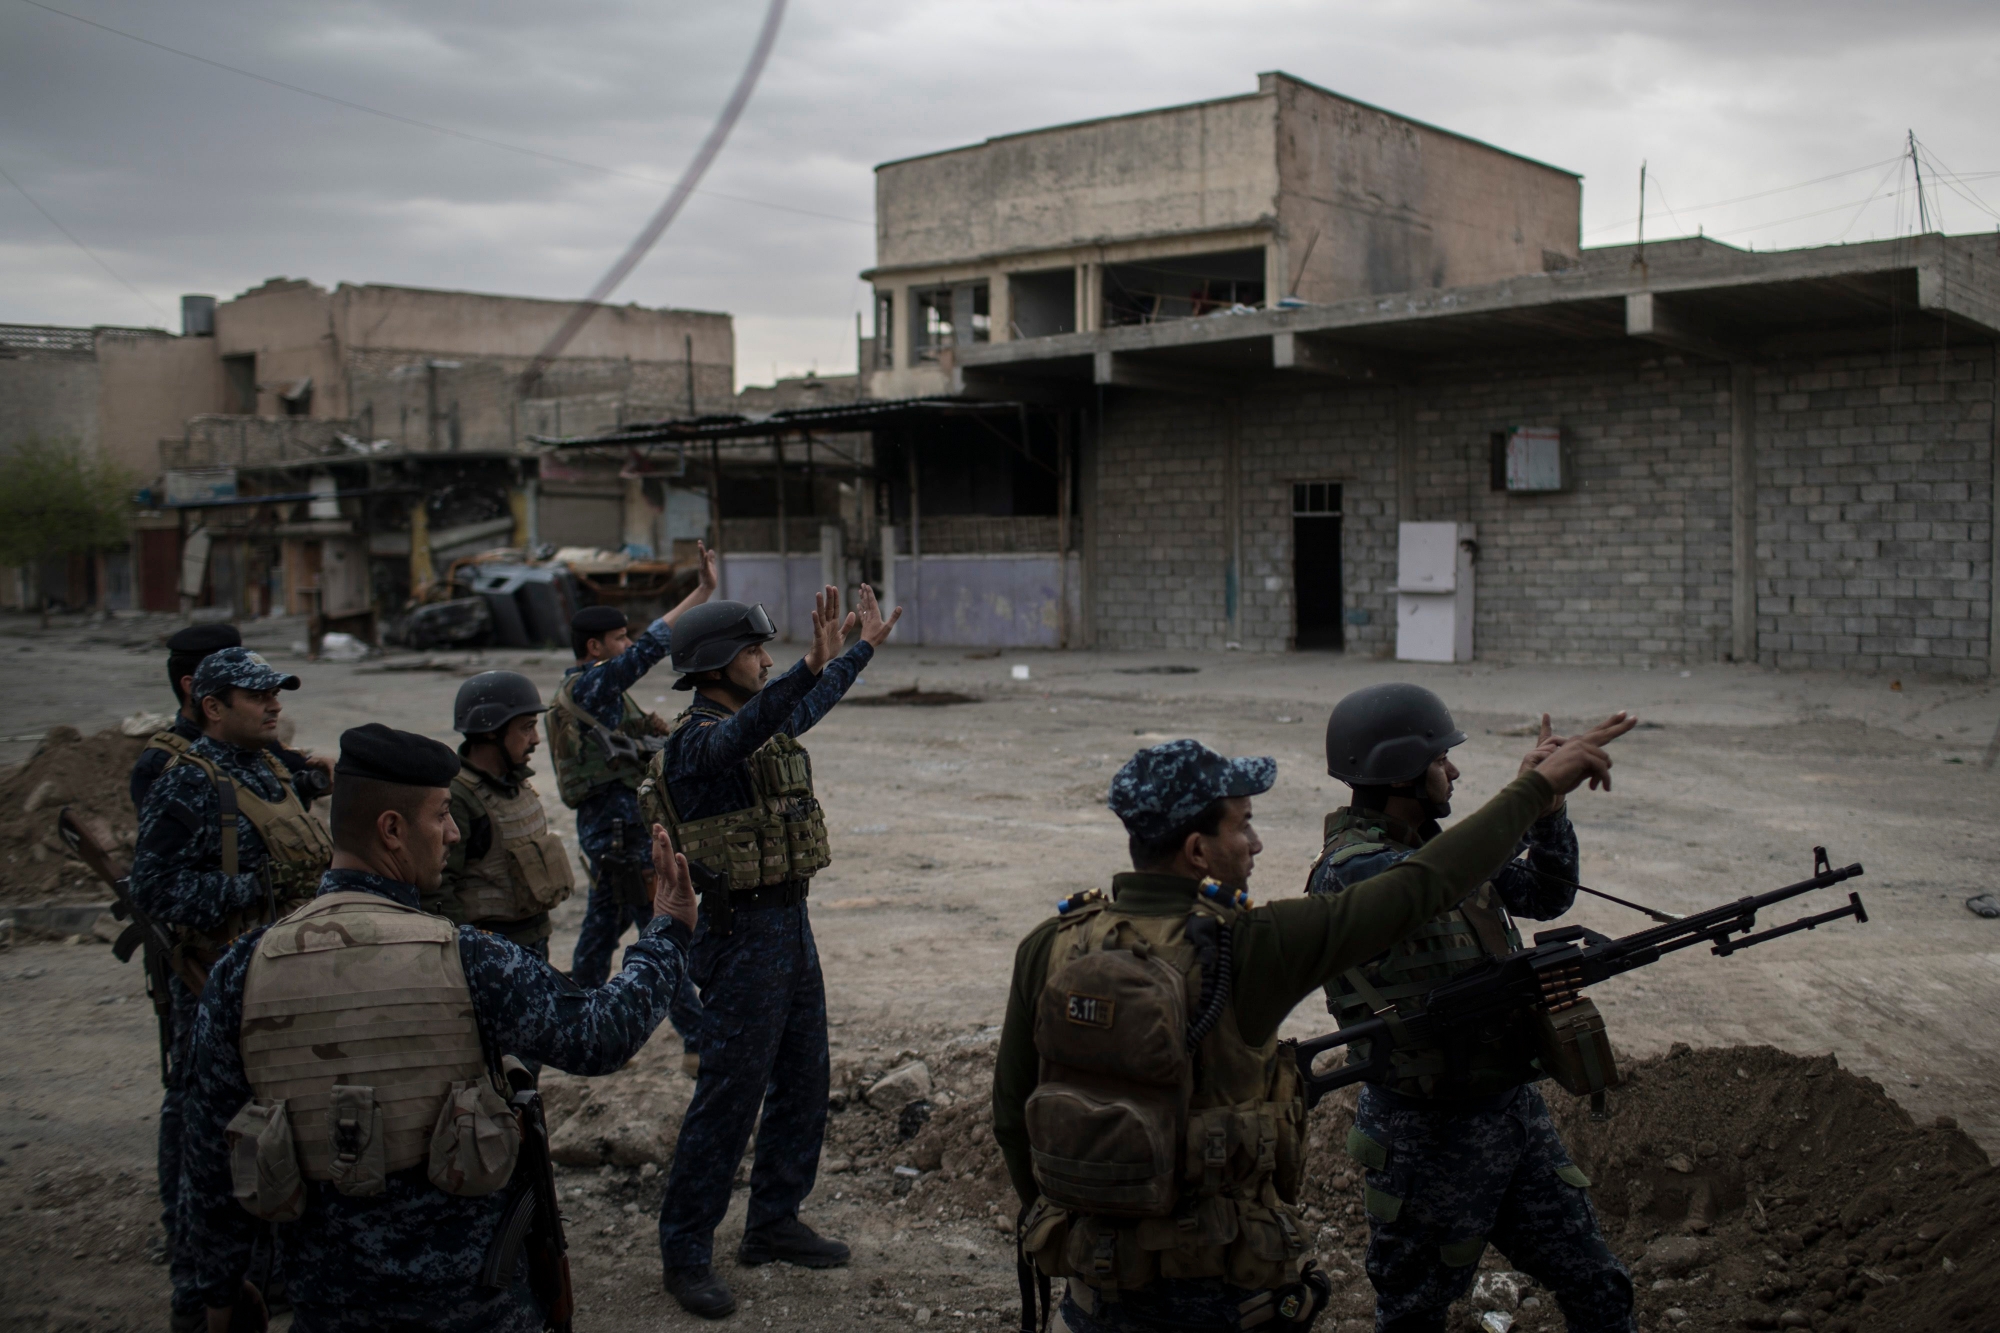 Federal Police soldiers gesture to other soldiers near the old city, during fighting against Islamic State militants on the western side of in Mosul, Iraq, Tuesday, March 28, 2017. (AP Photo/Felipe Dana) Iraq Mosul